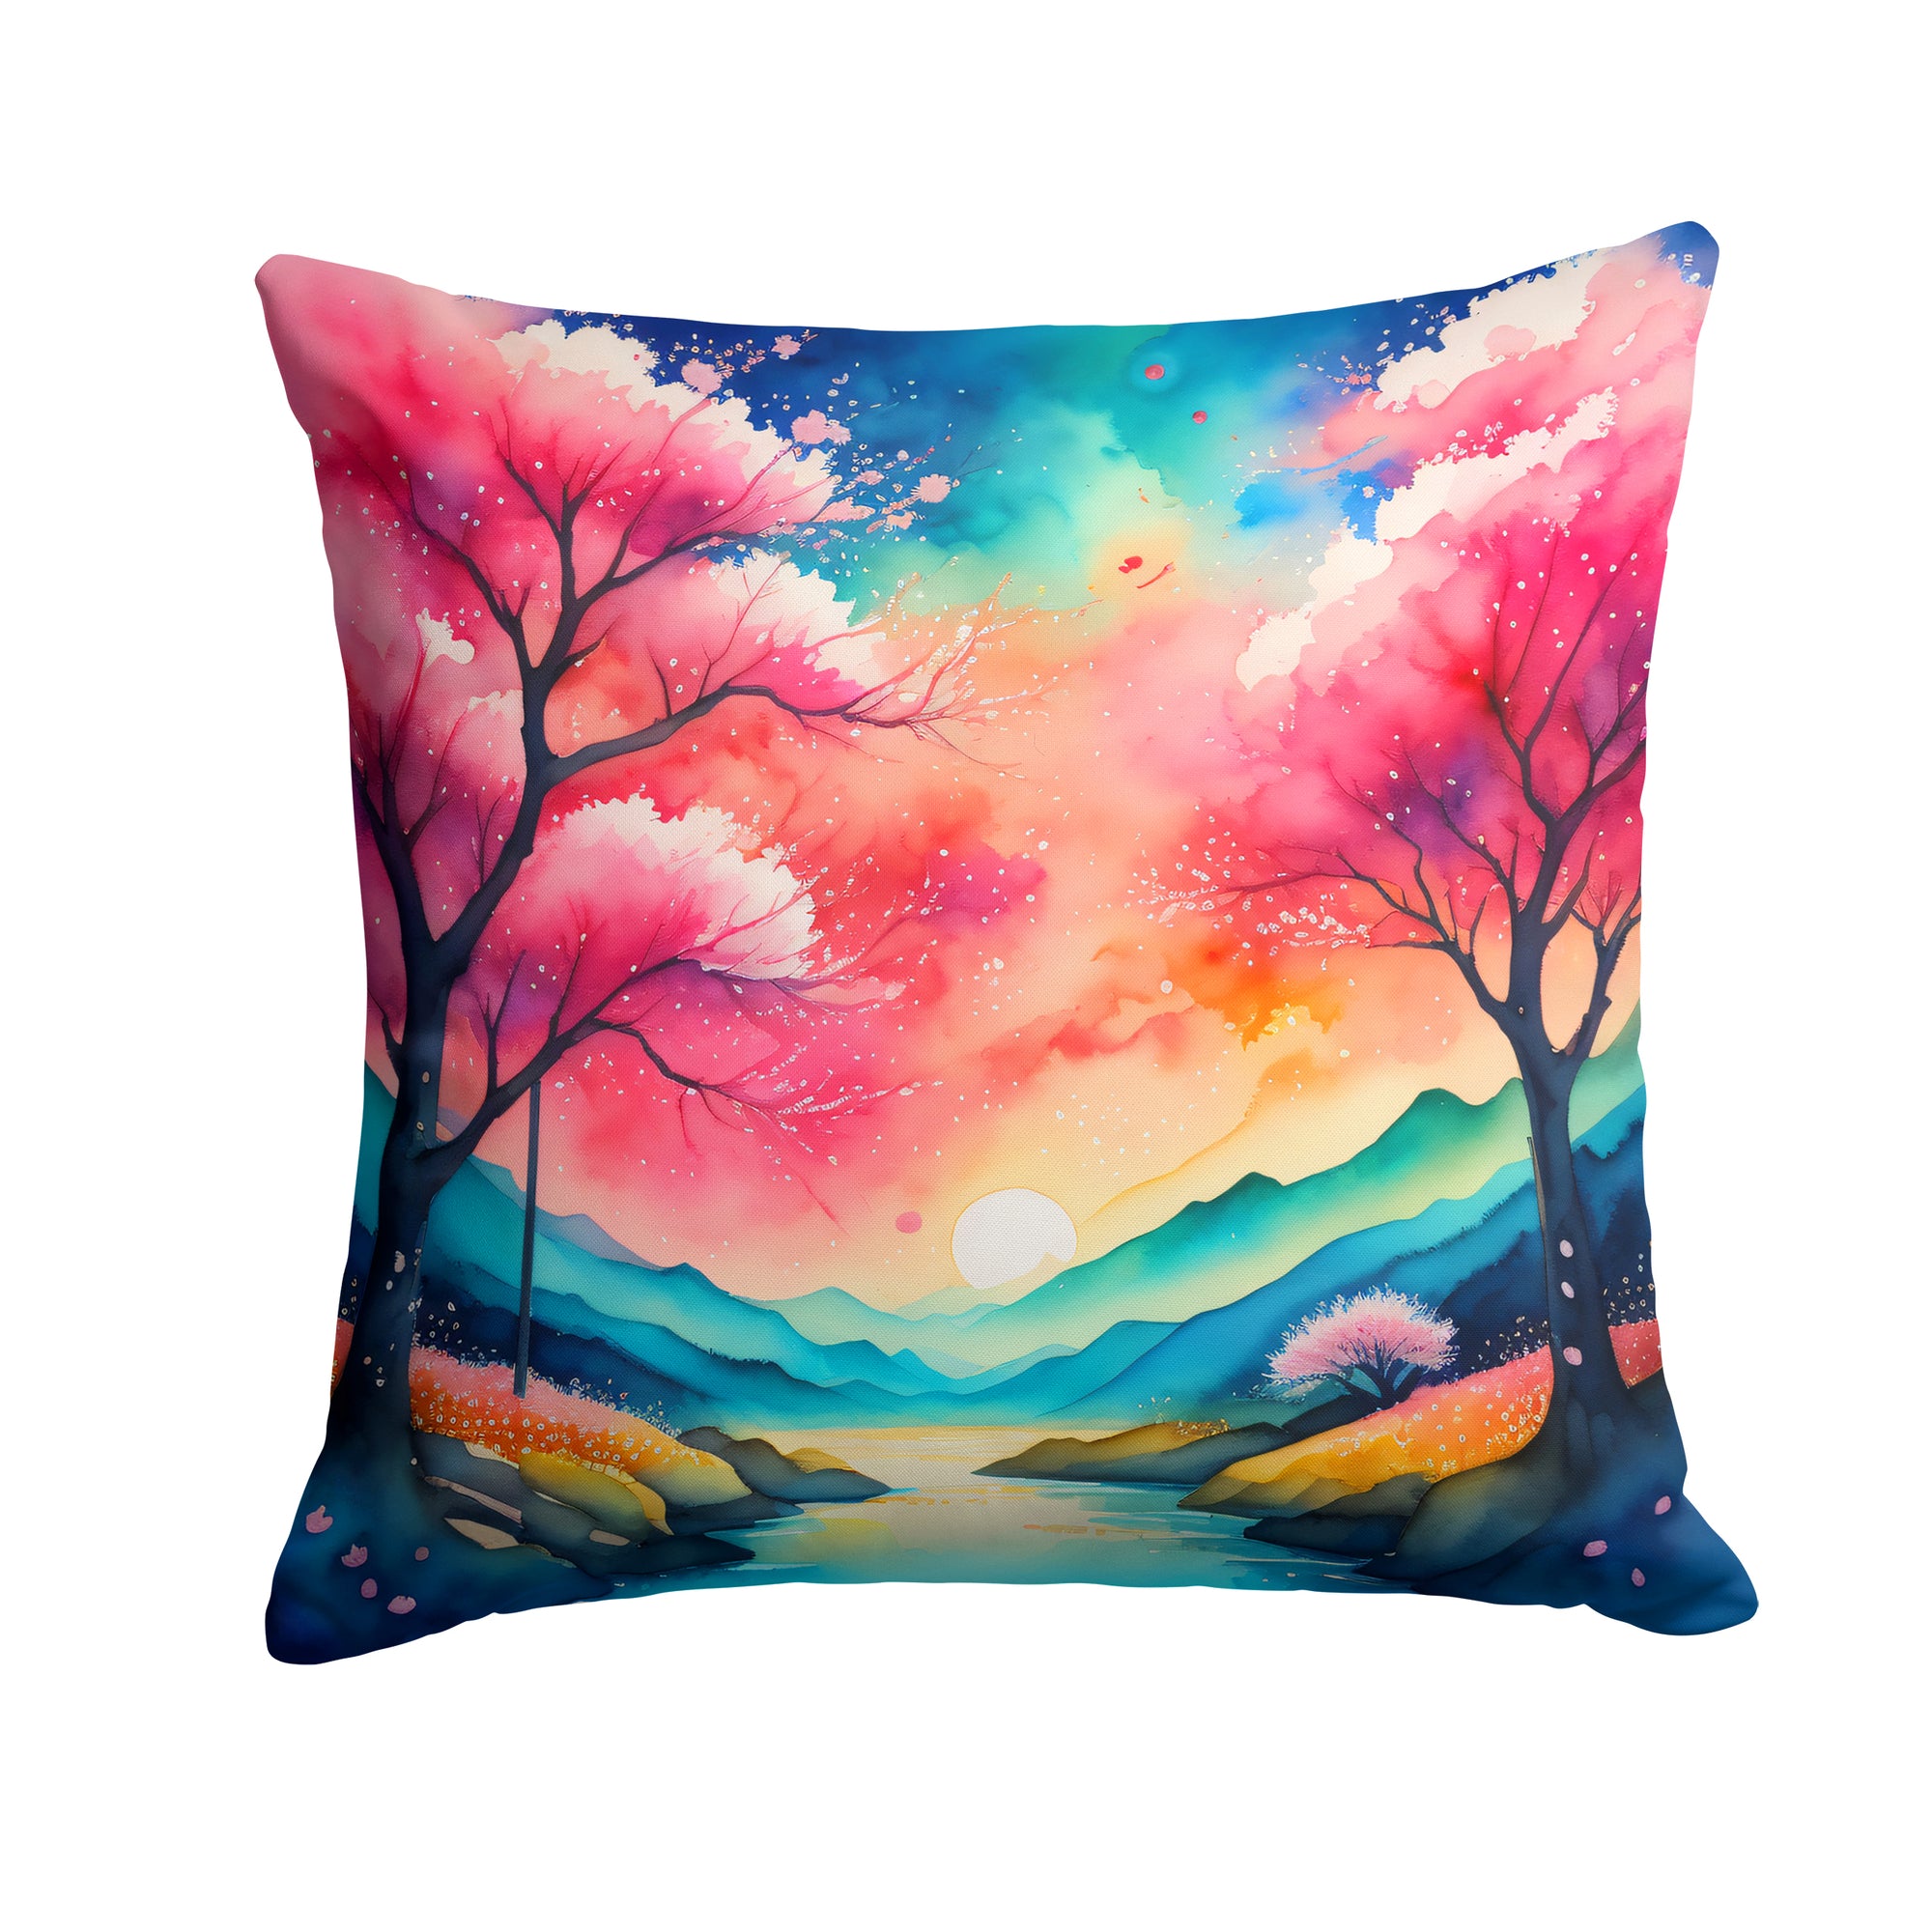 Buy this Colorful Cherry Blossoms Fabric Decorative Pillow